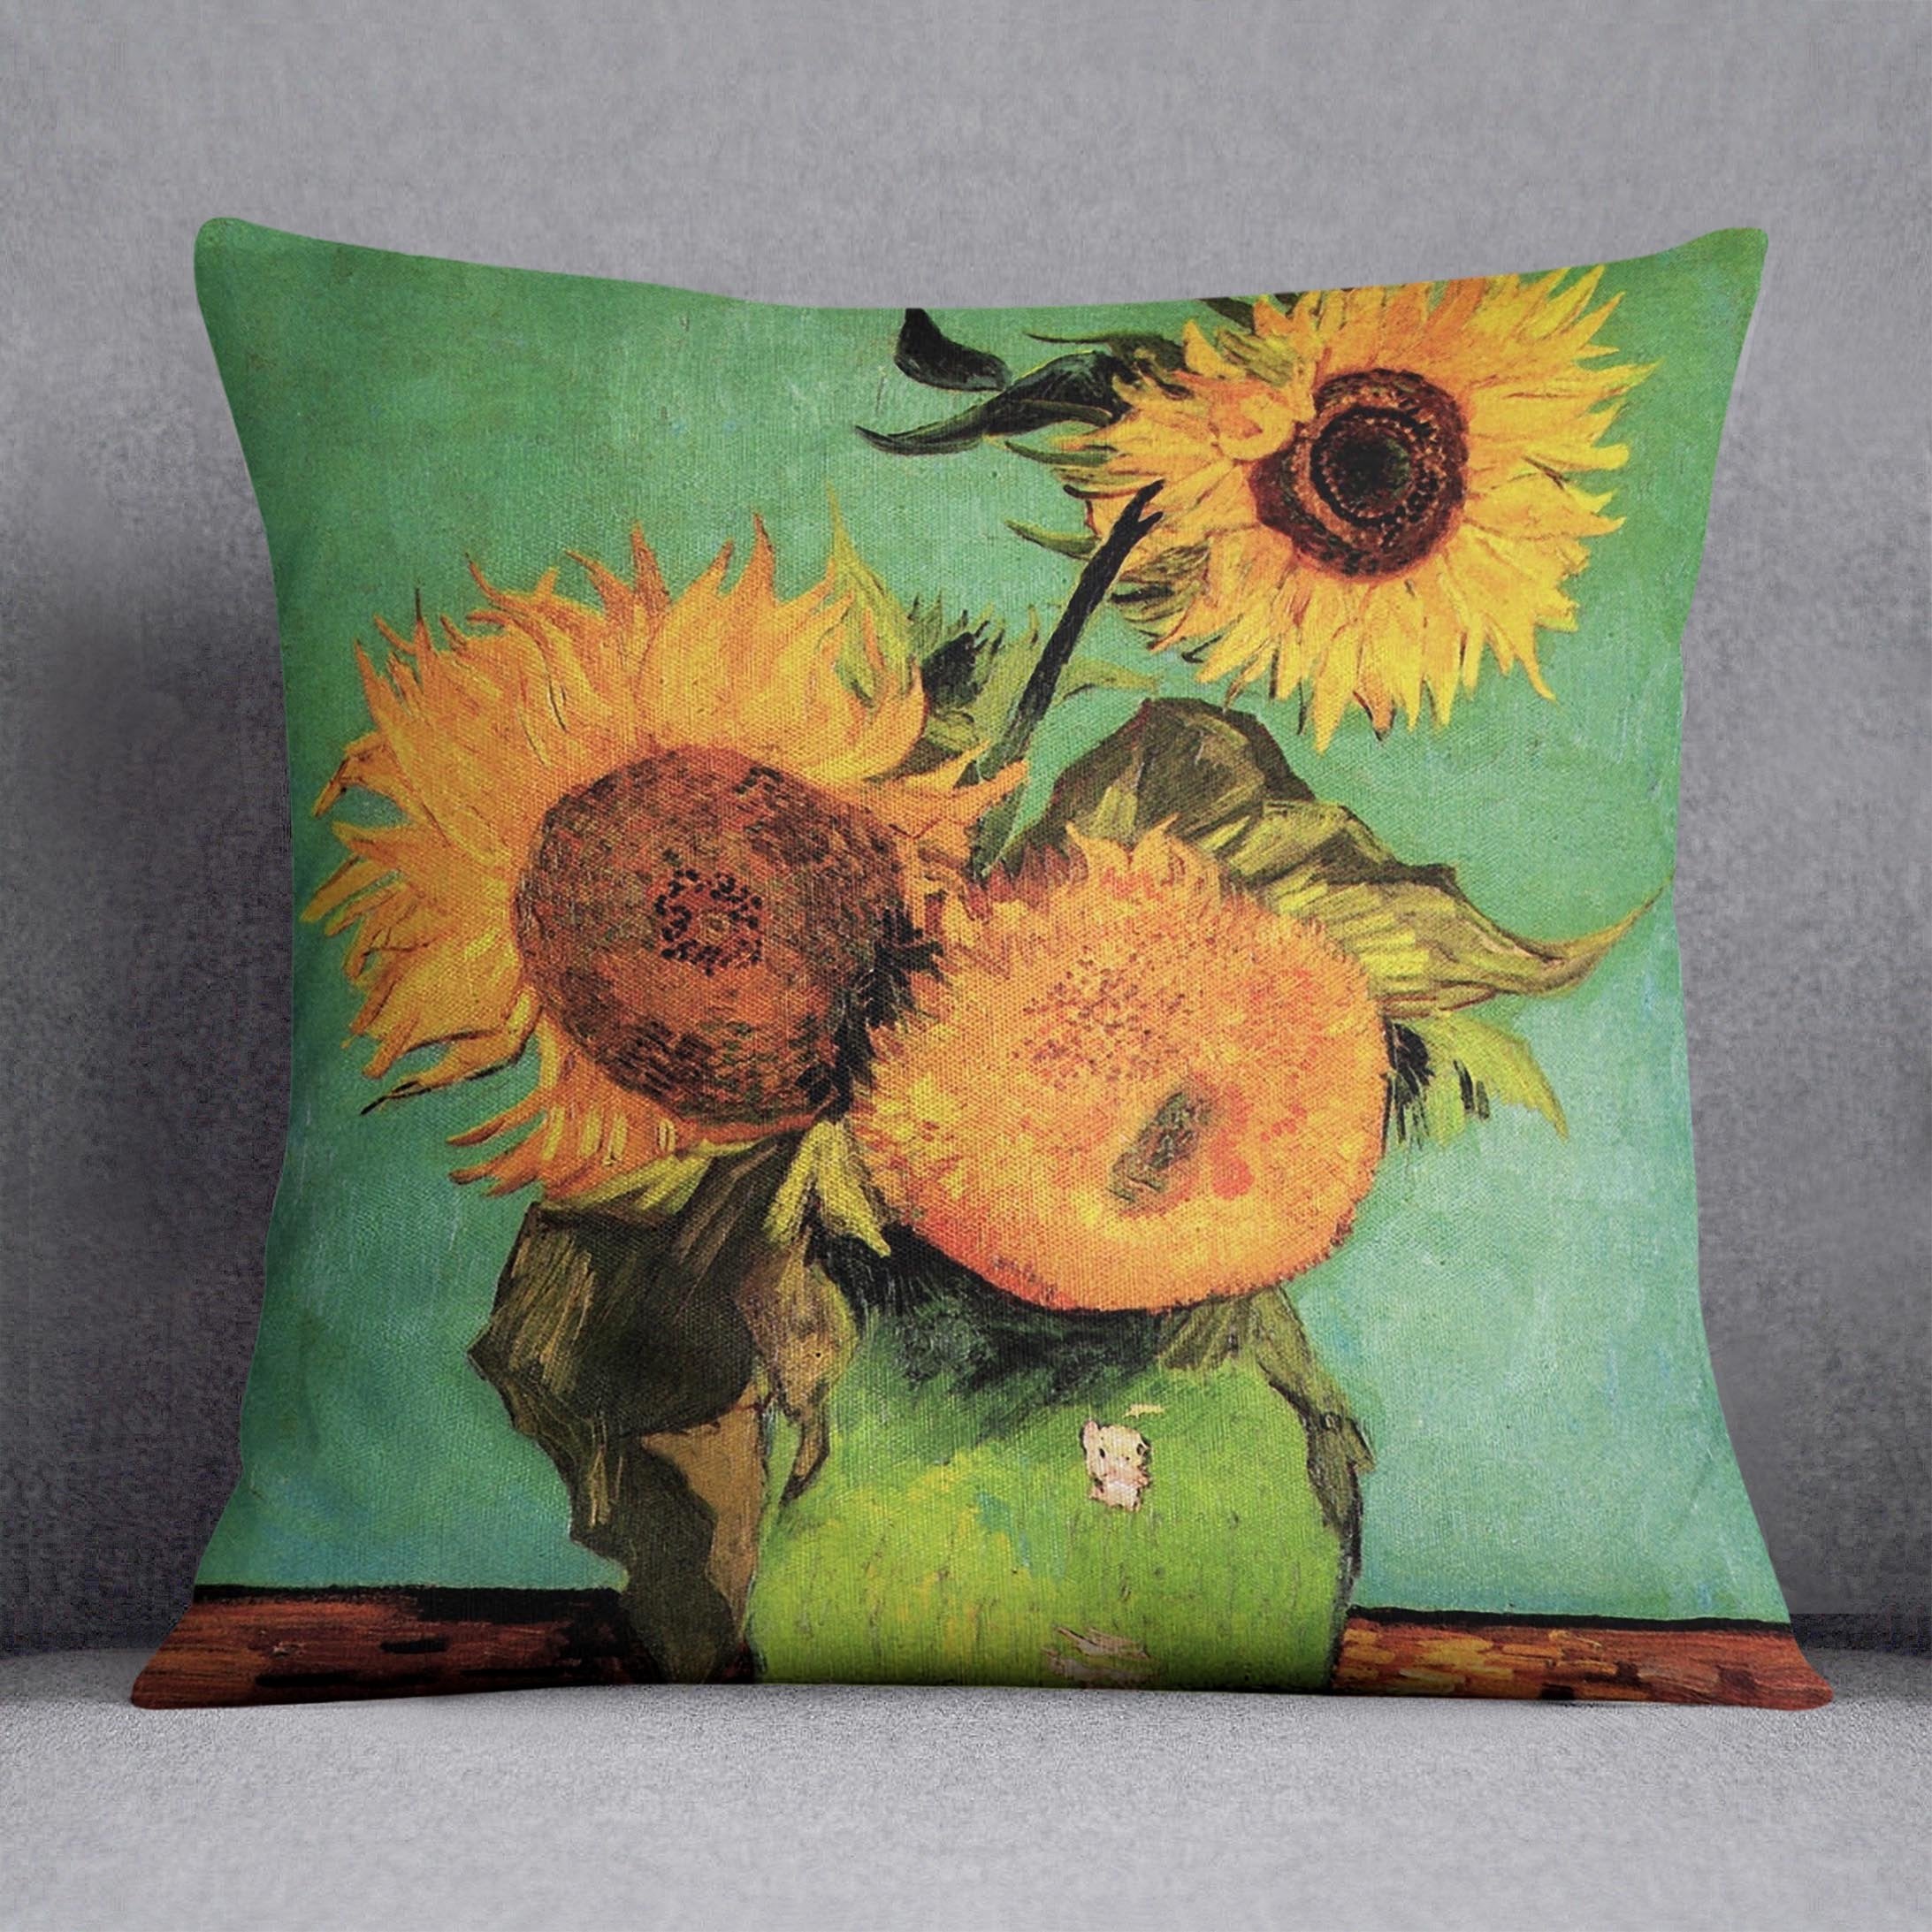 Three Sunflowers in a Vase by Van Gogh Throw Pillow